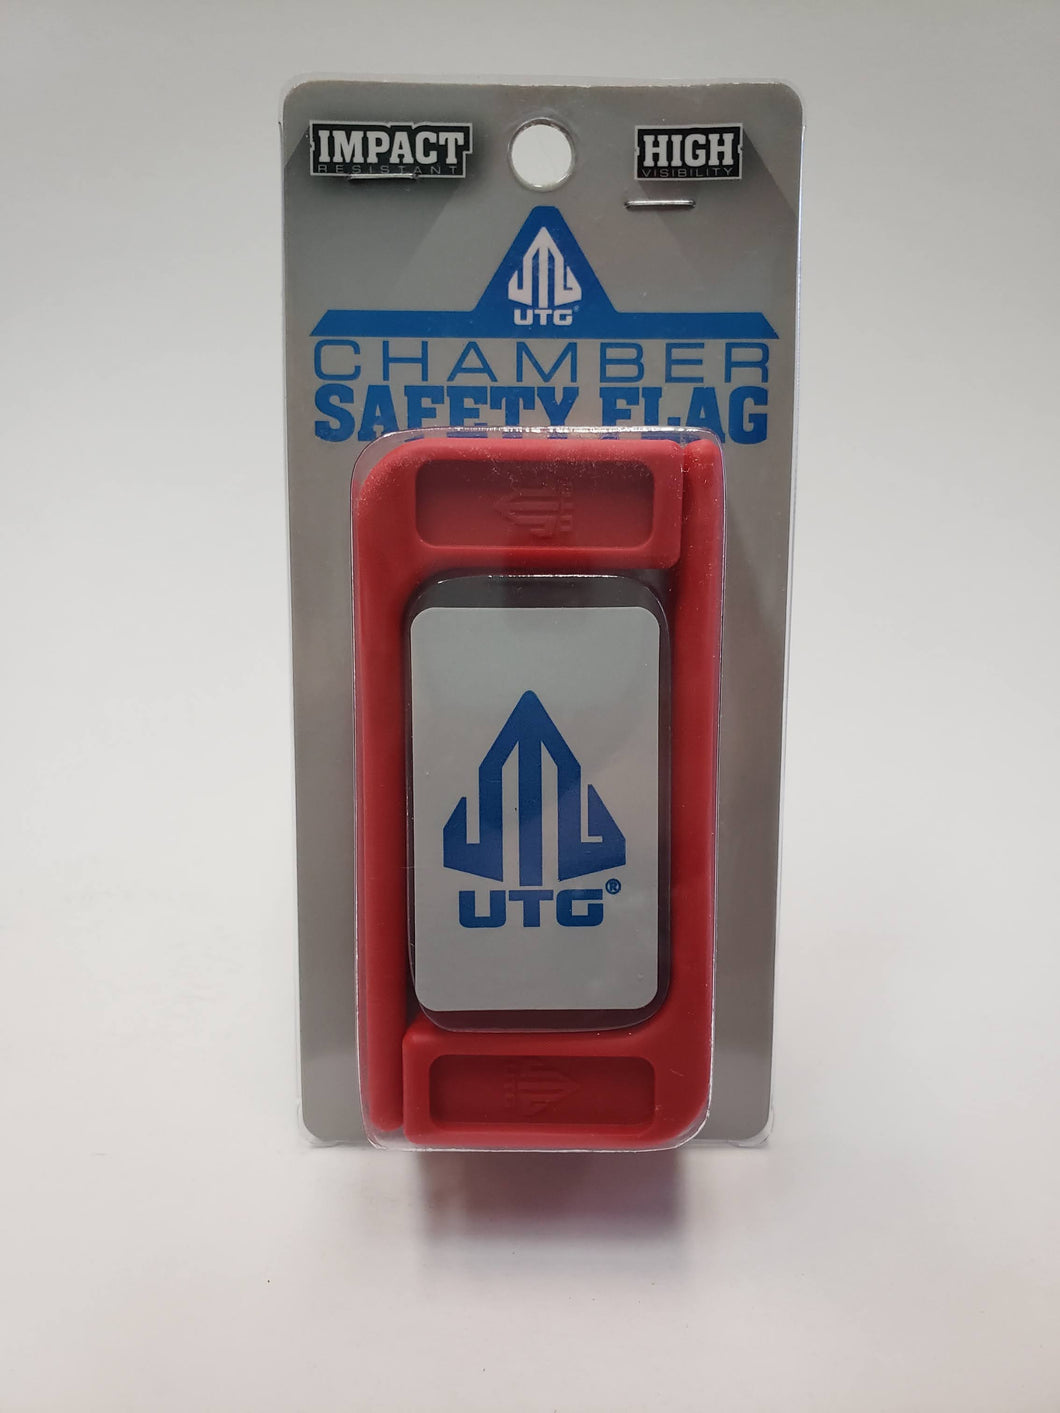 Chamber Safety Flag